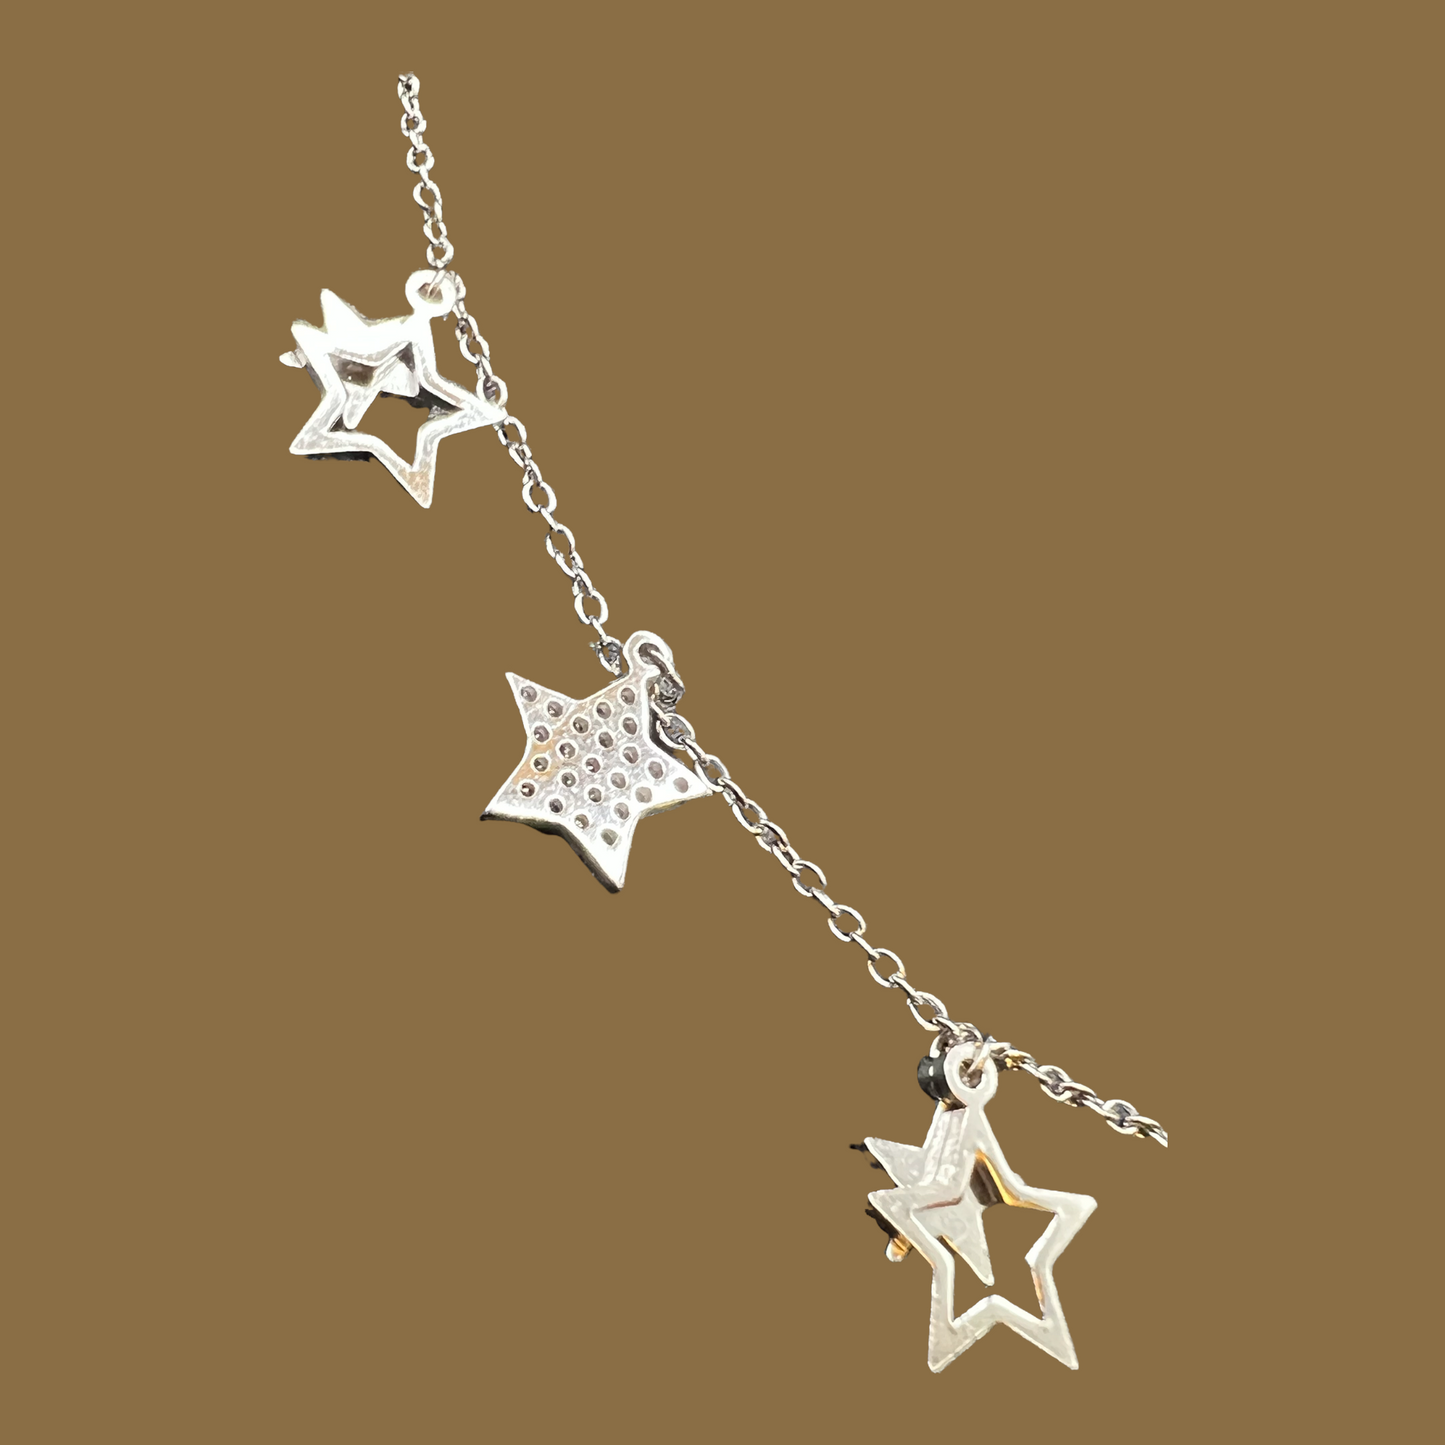 The Lucky Stars Necklace